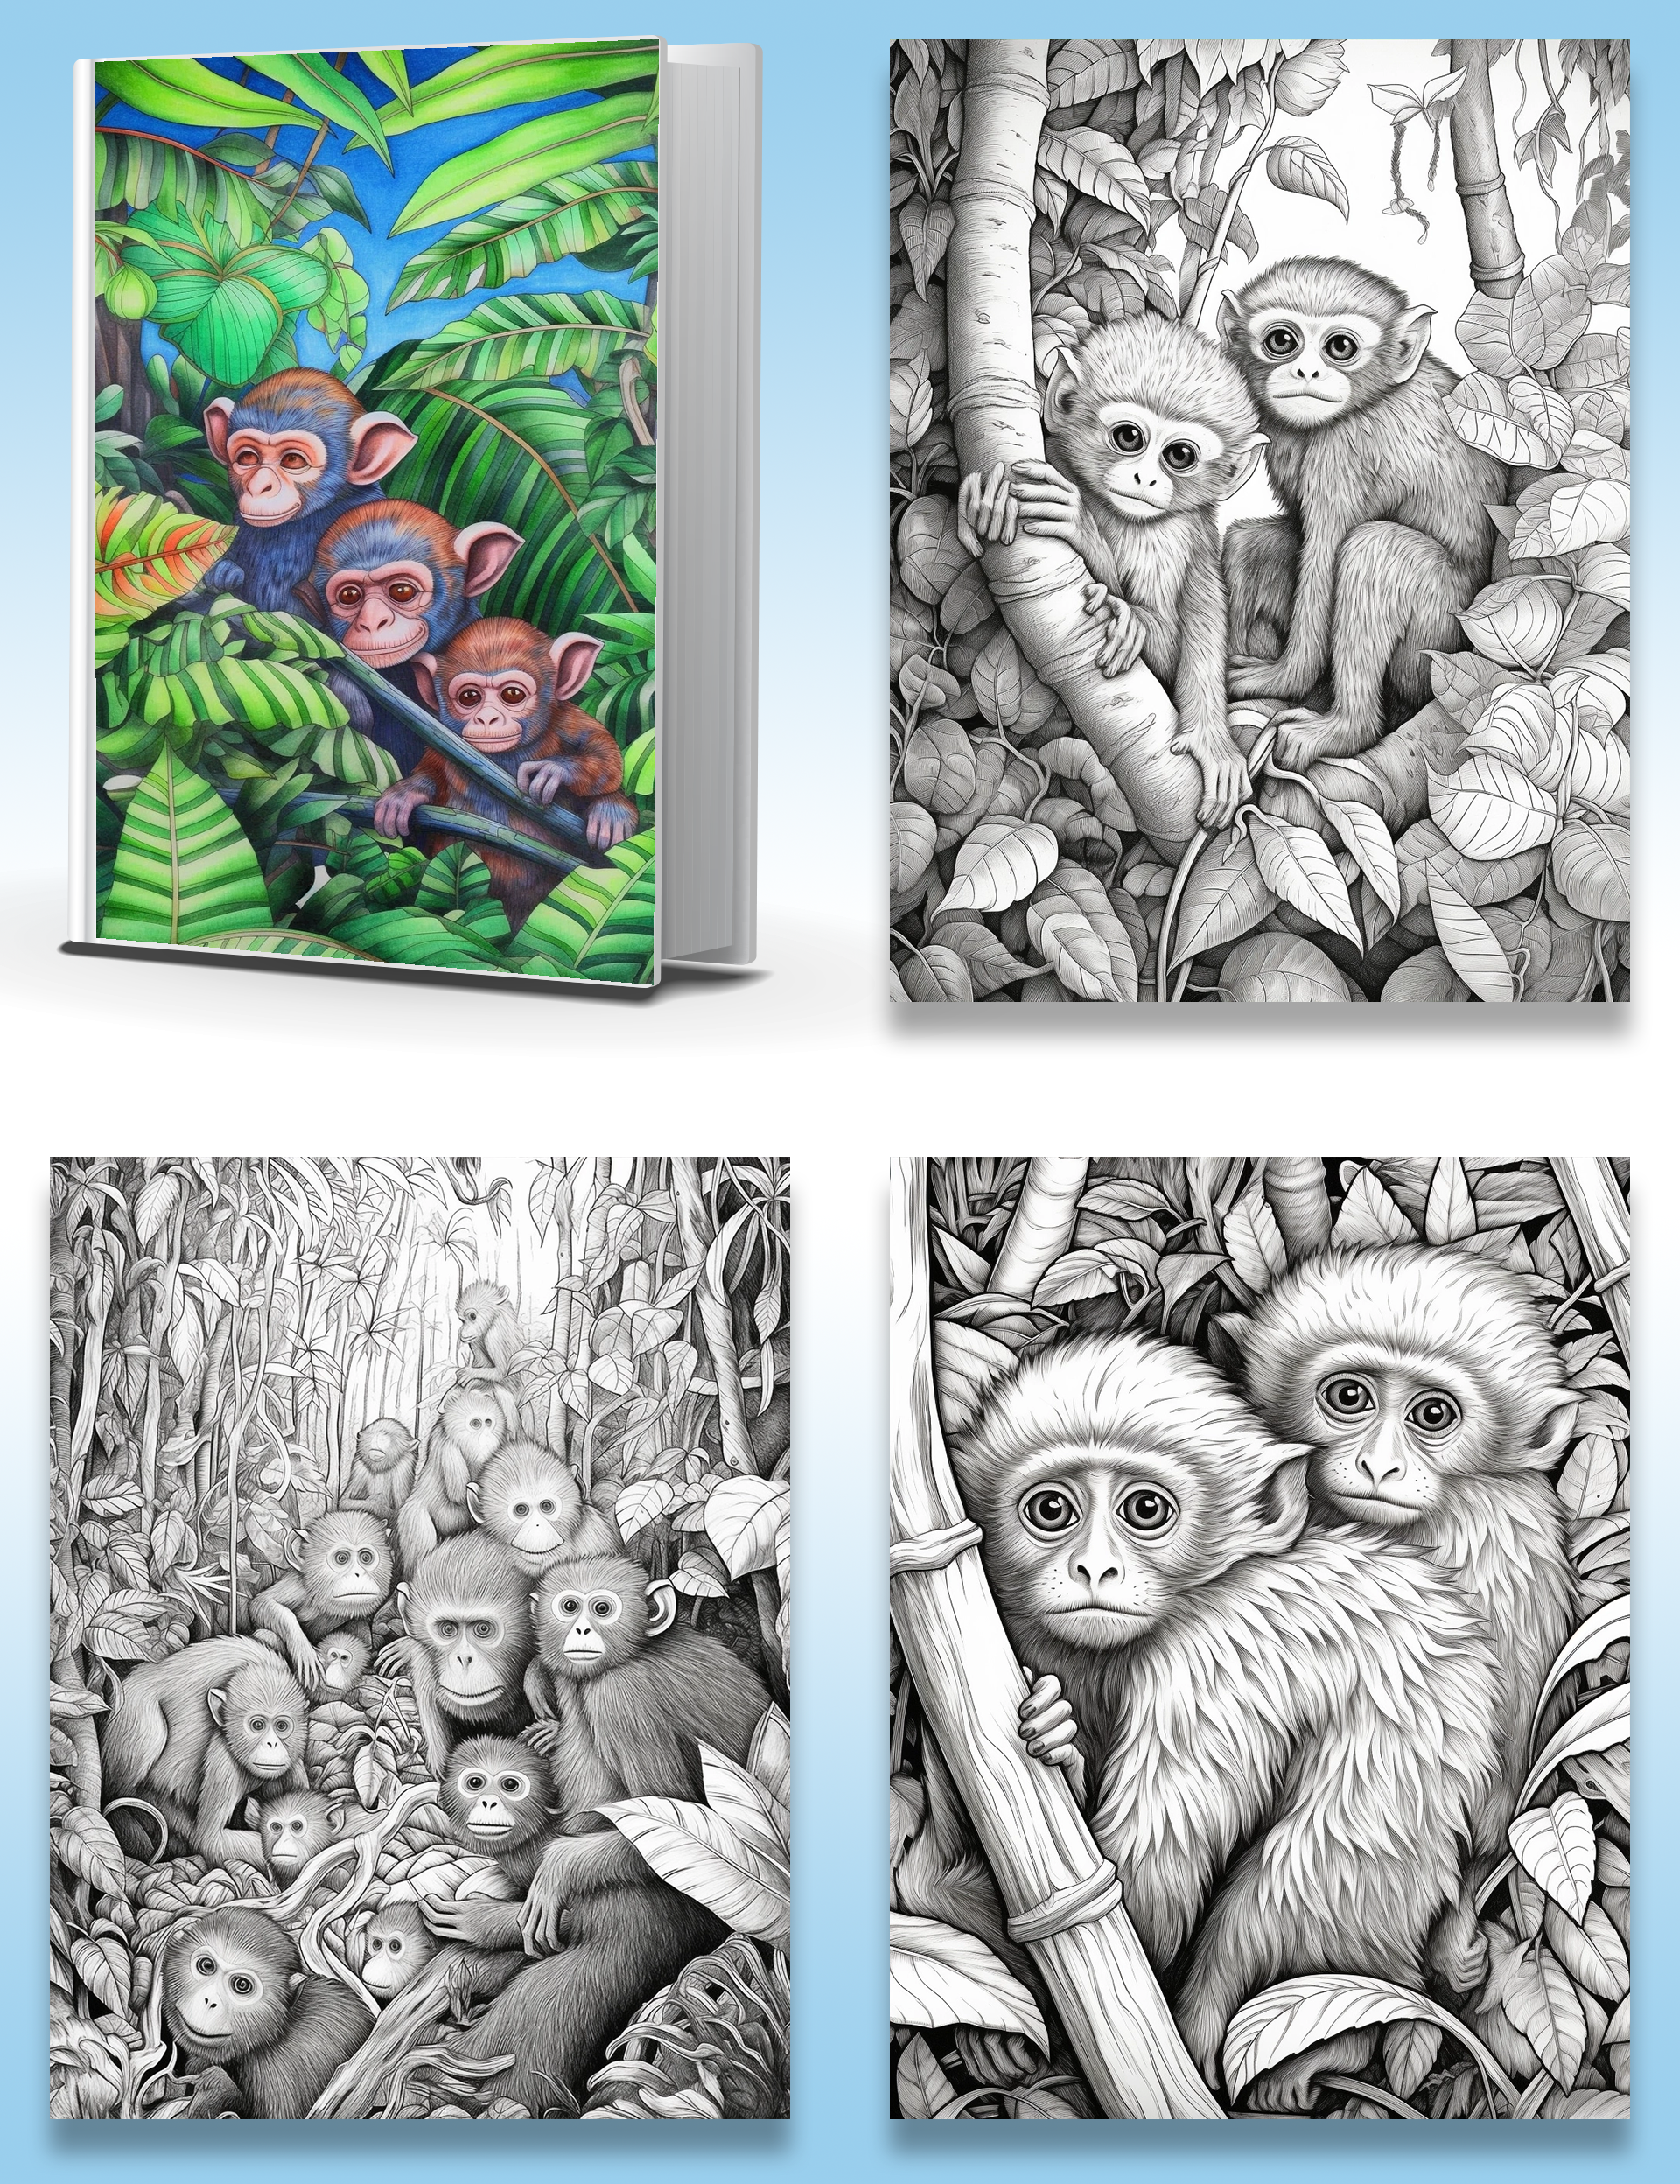 A Wild Coloring Expedition with Playful Primates